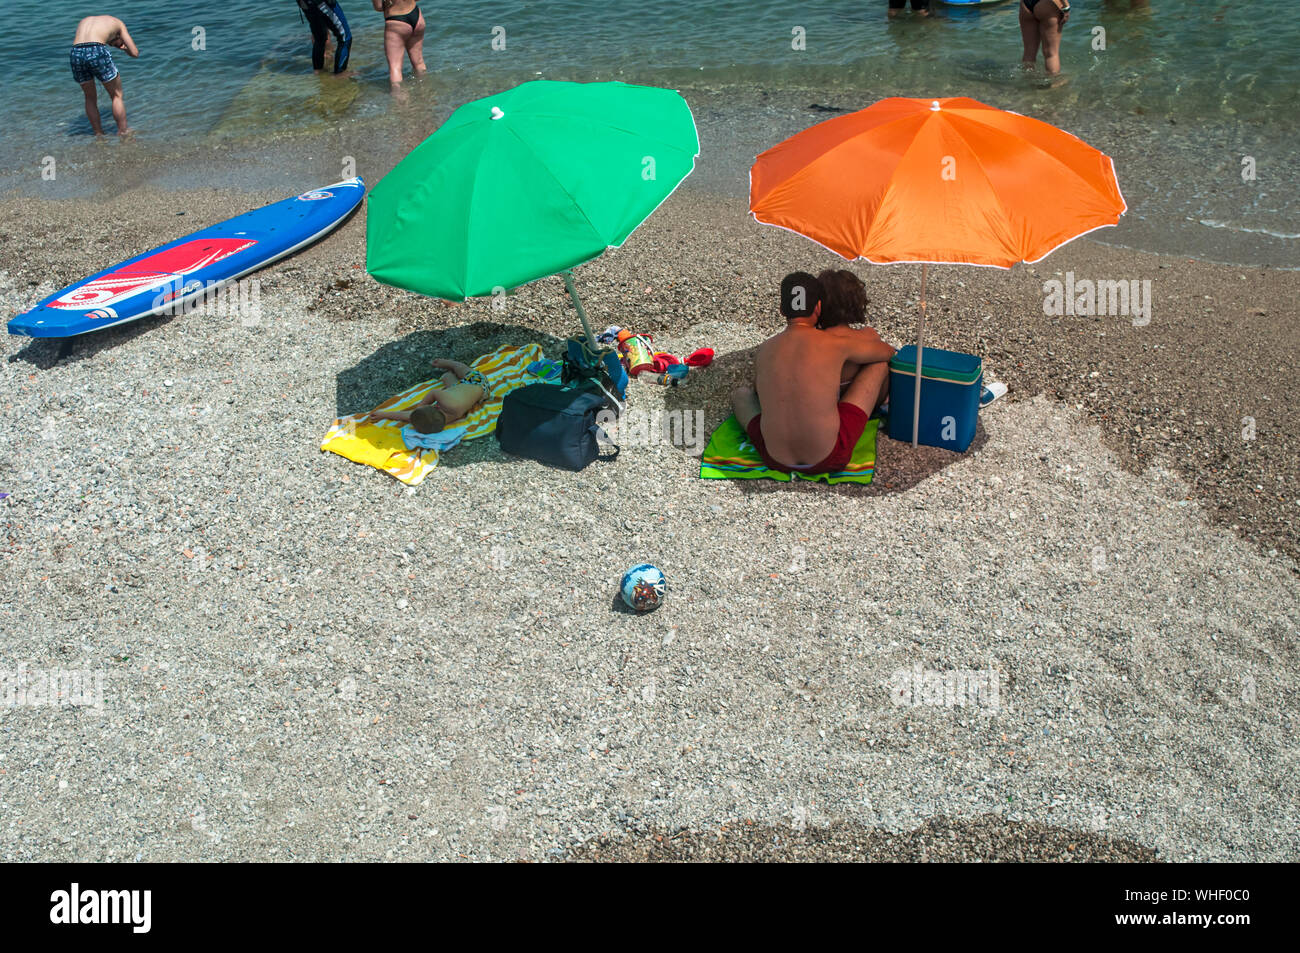 A lovely summer afternoon at the beach in Maiori on the Amalfi Coast, Italy Stock Photo